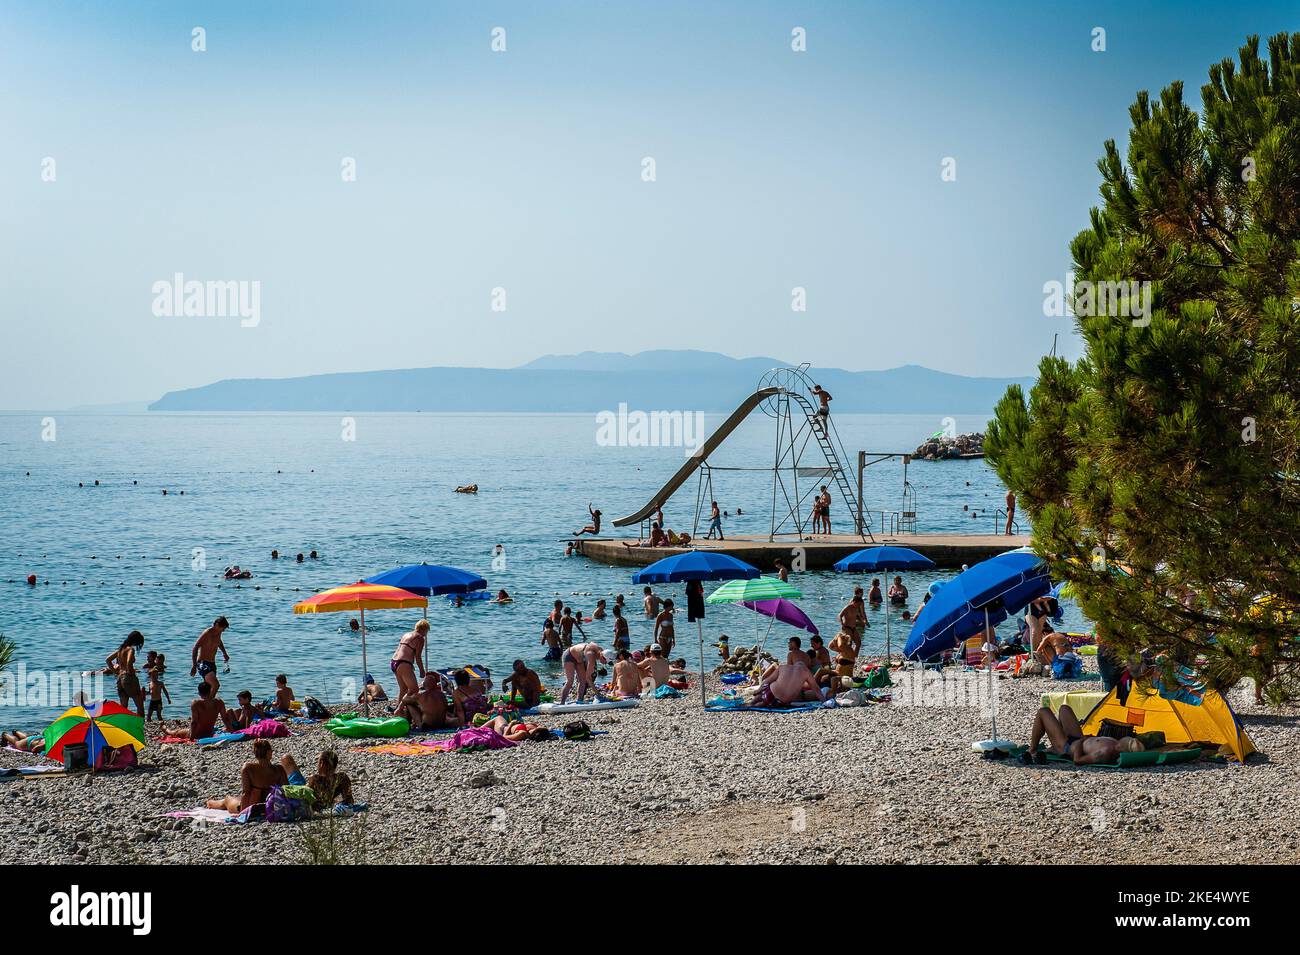 Beach on the Adriatic, Croatia, sunbathers on beach with slide shoot in the background calm day in summer Stock Photo